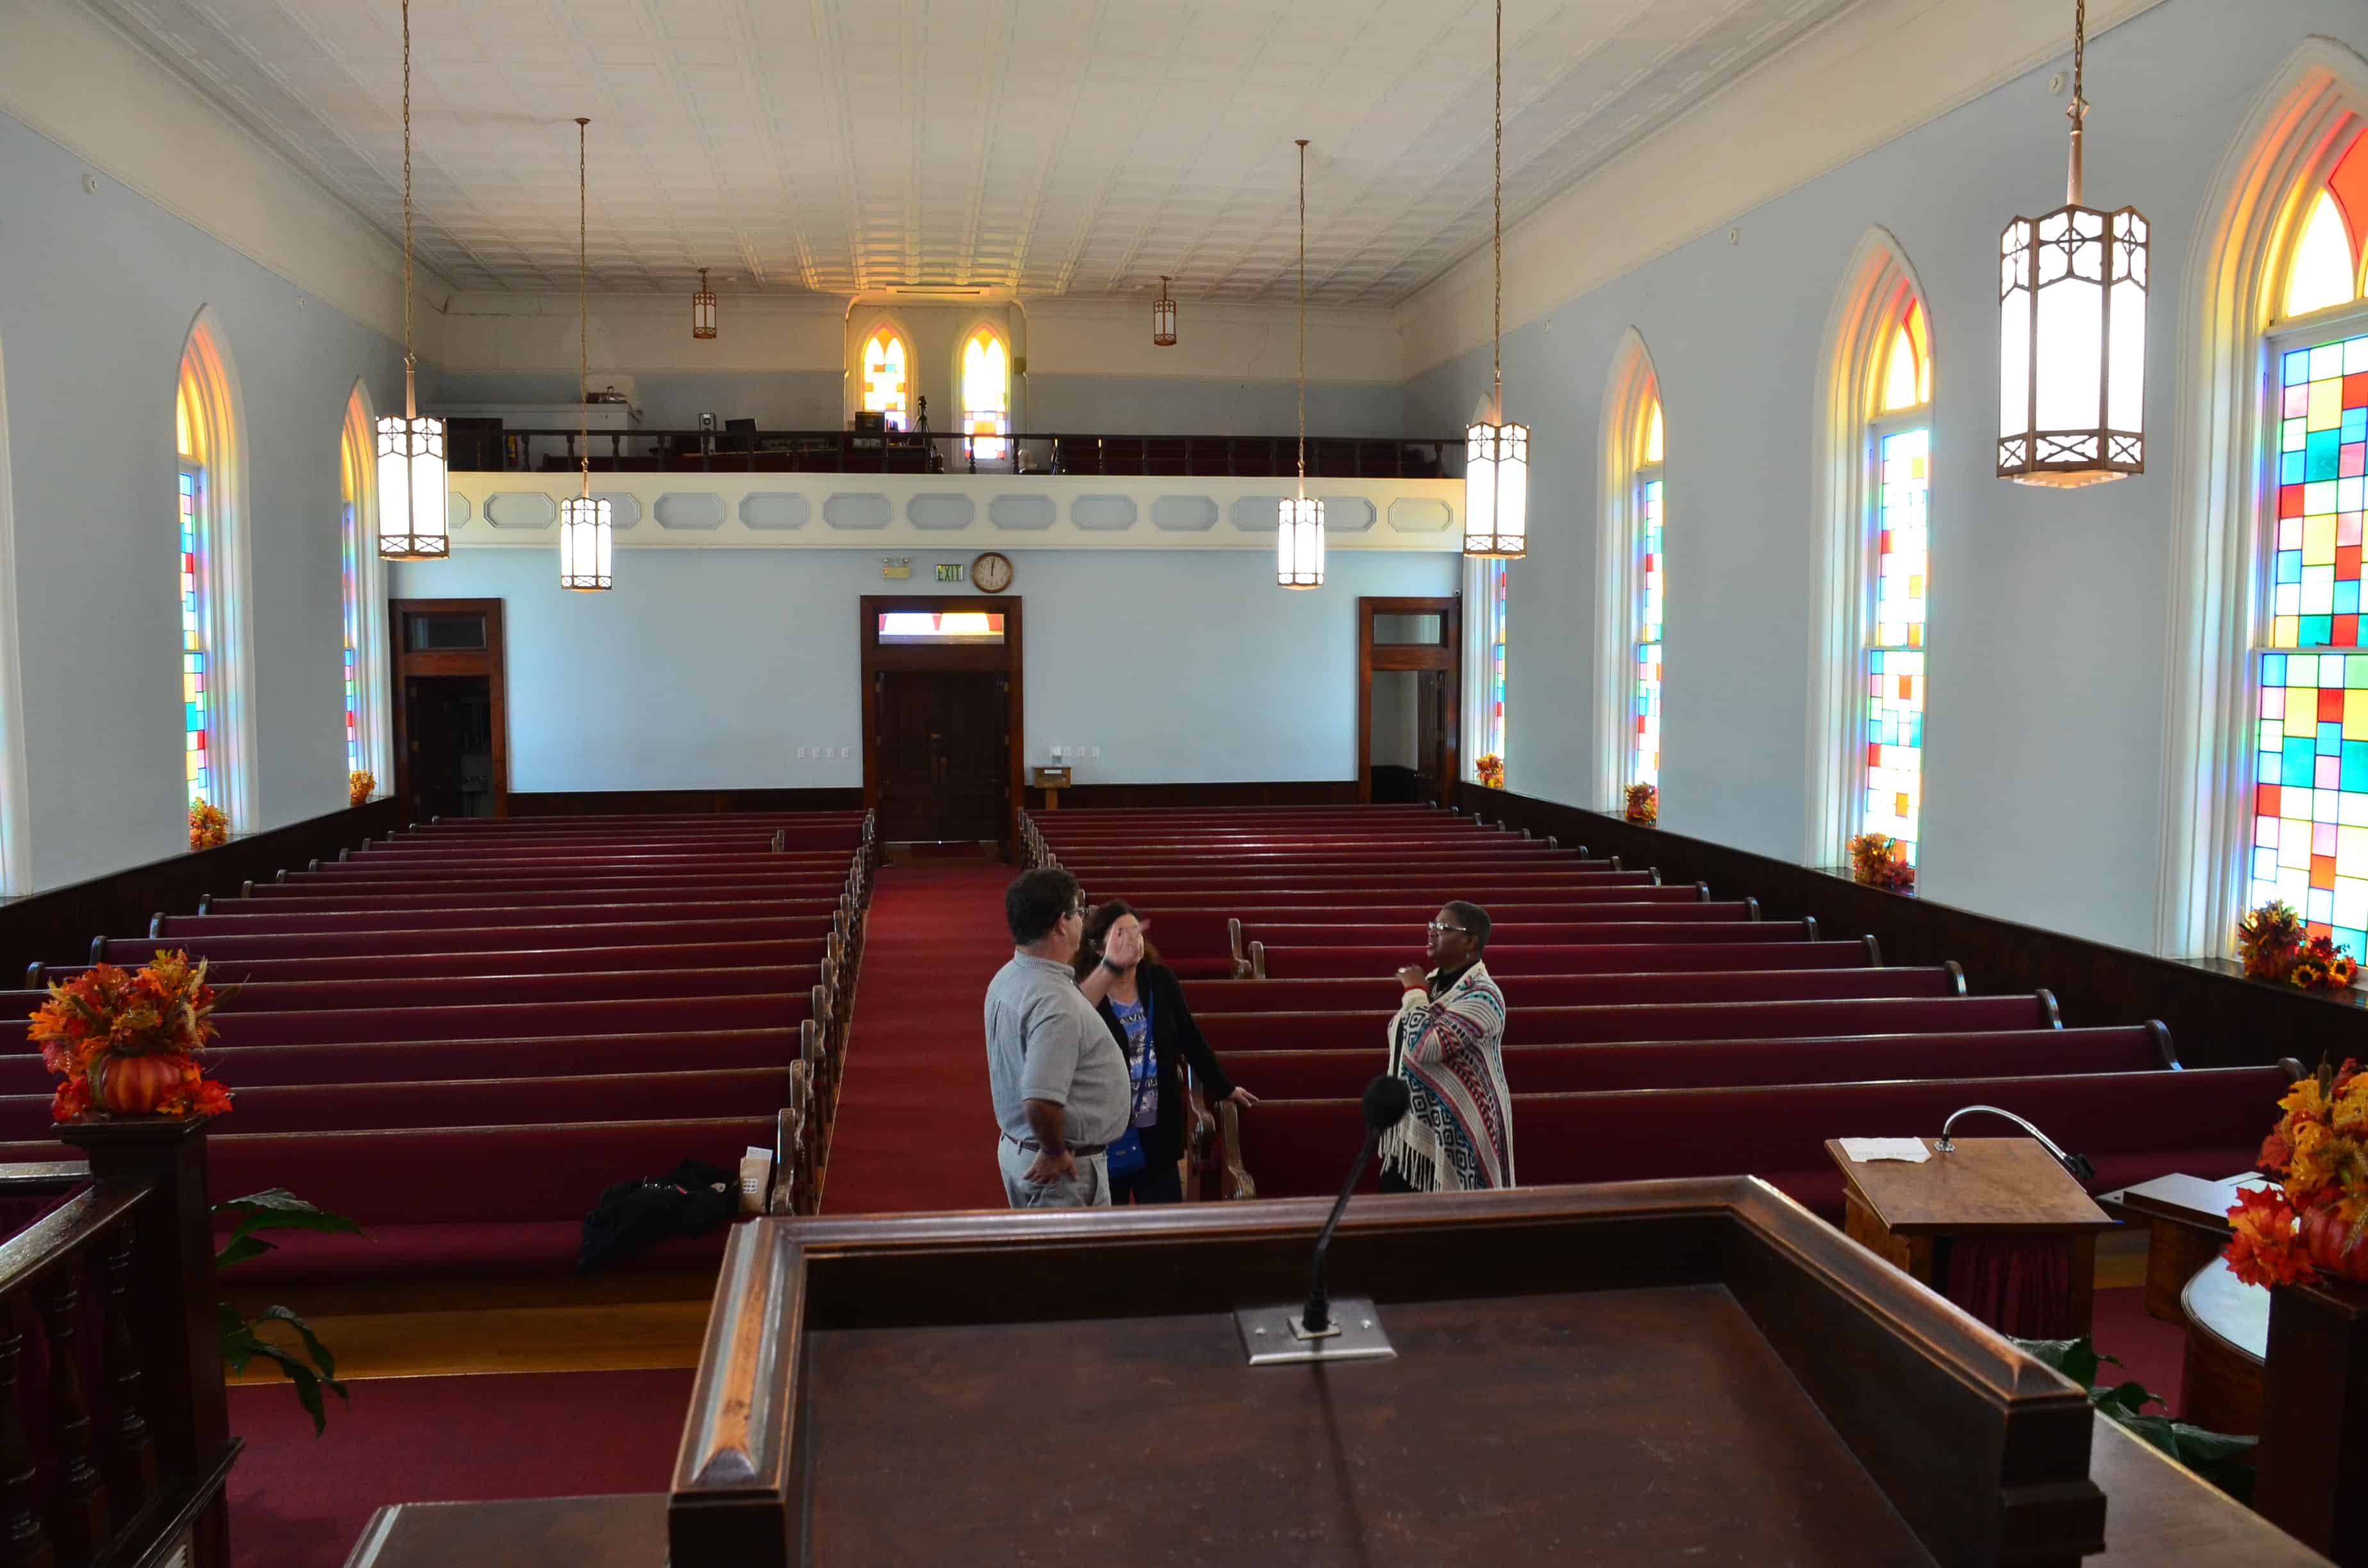 View from the pulpit at Dexter Avenue King Memorial Baptist Church in Montgomery, Alabama